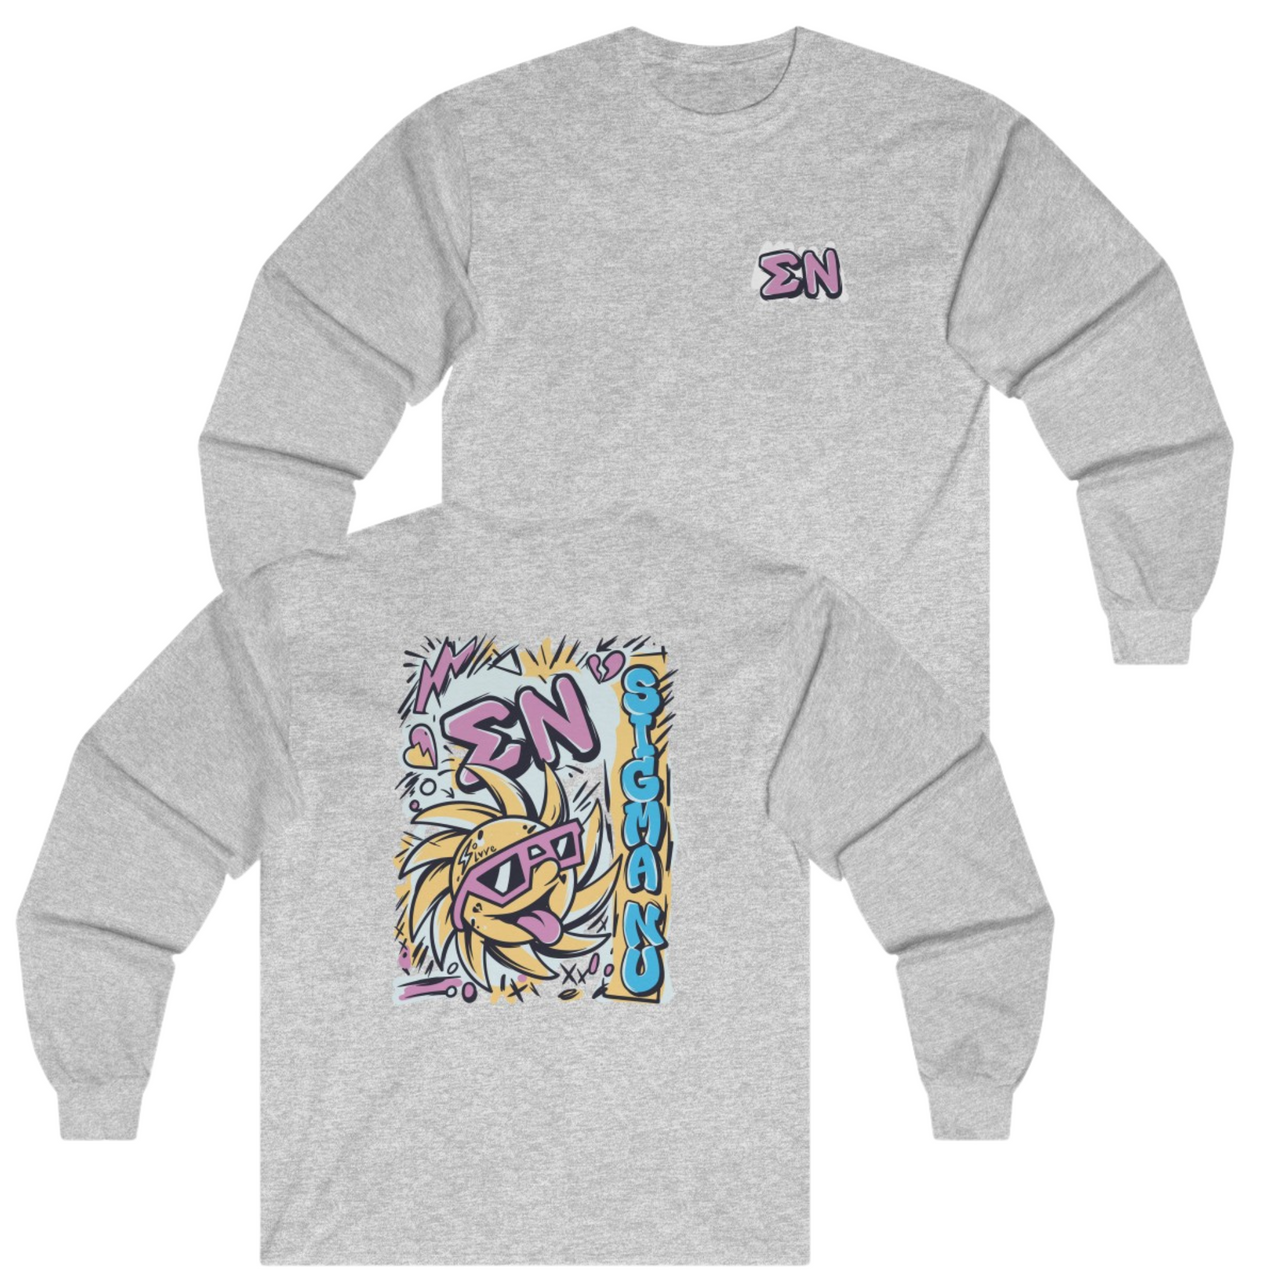 Grey Sigma Nu Graphic Long Sleeve | Fun in the Sun | Sigma Nu Clothing, Apparel and Merchandise